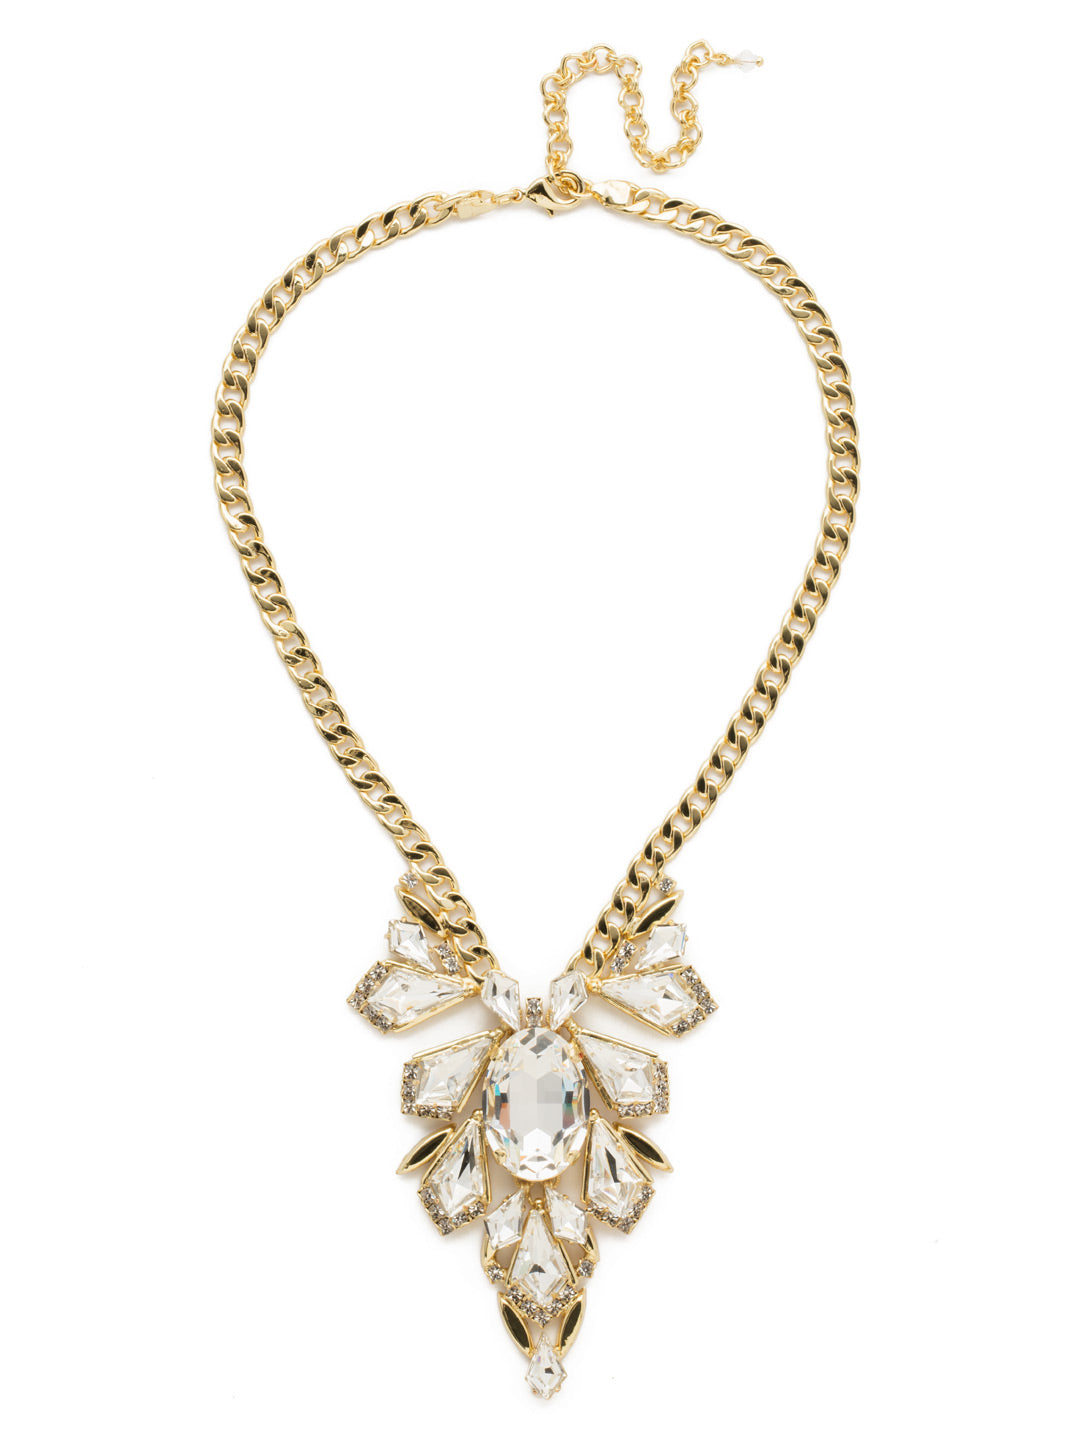 Ice Queen Necklace - NDW8BGCRY - <p>A cluster of round and elongated diamond shaped crystals make up this eye-catching statement necklace. From Sorrelli's Crystal collection in our Bright Gold-tone finish.</p>